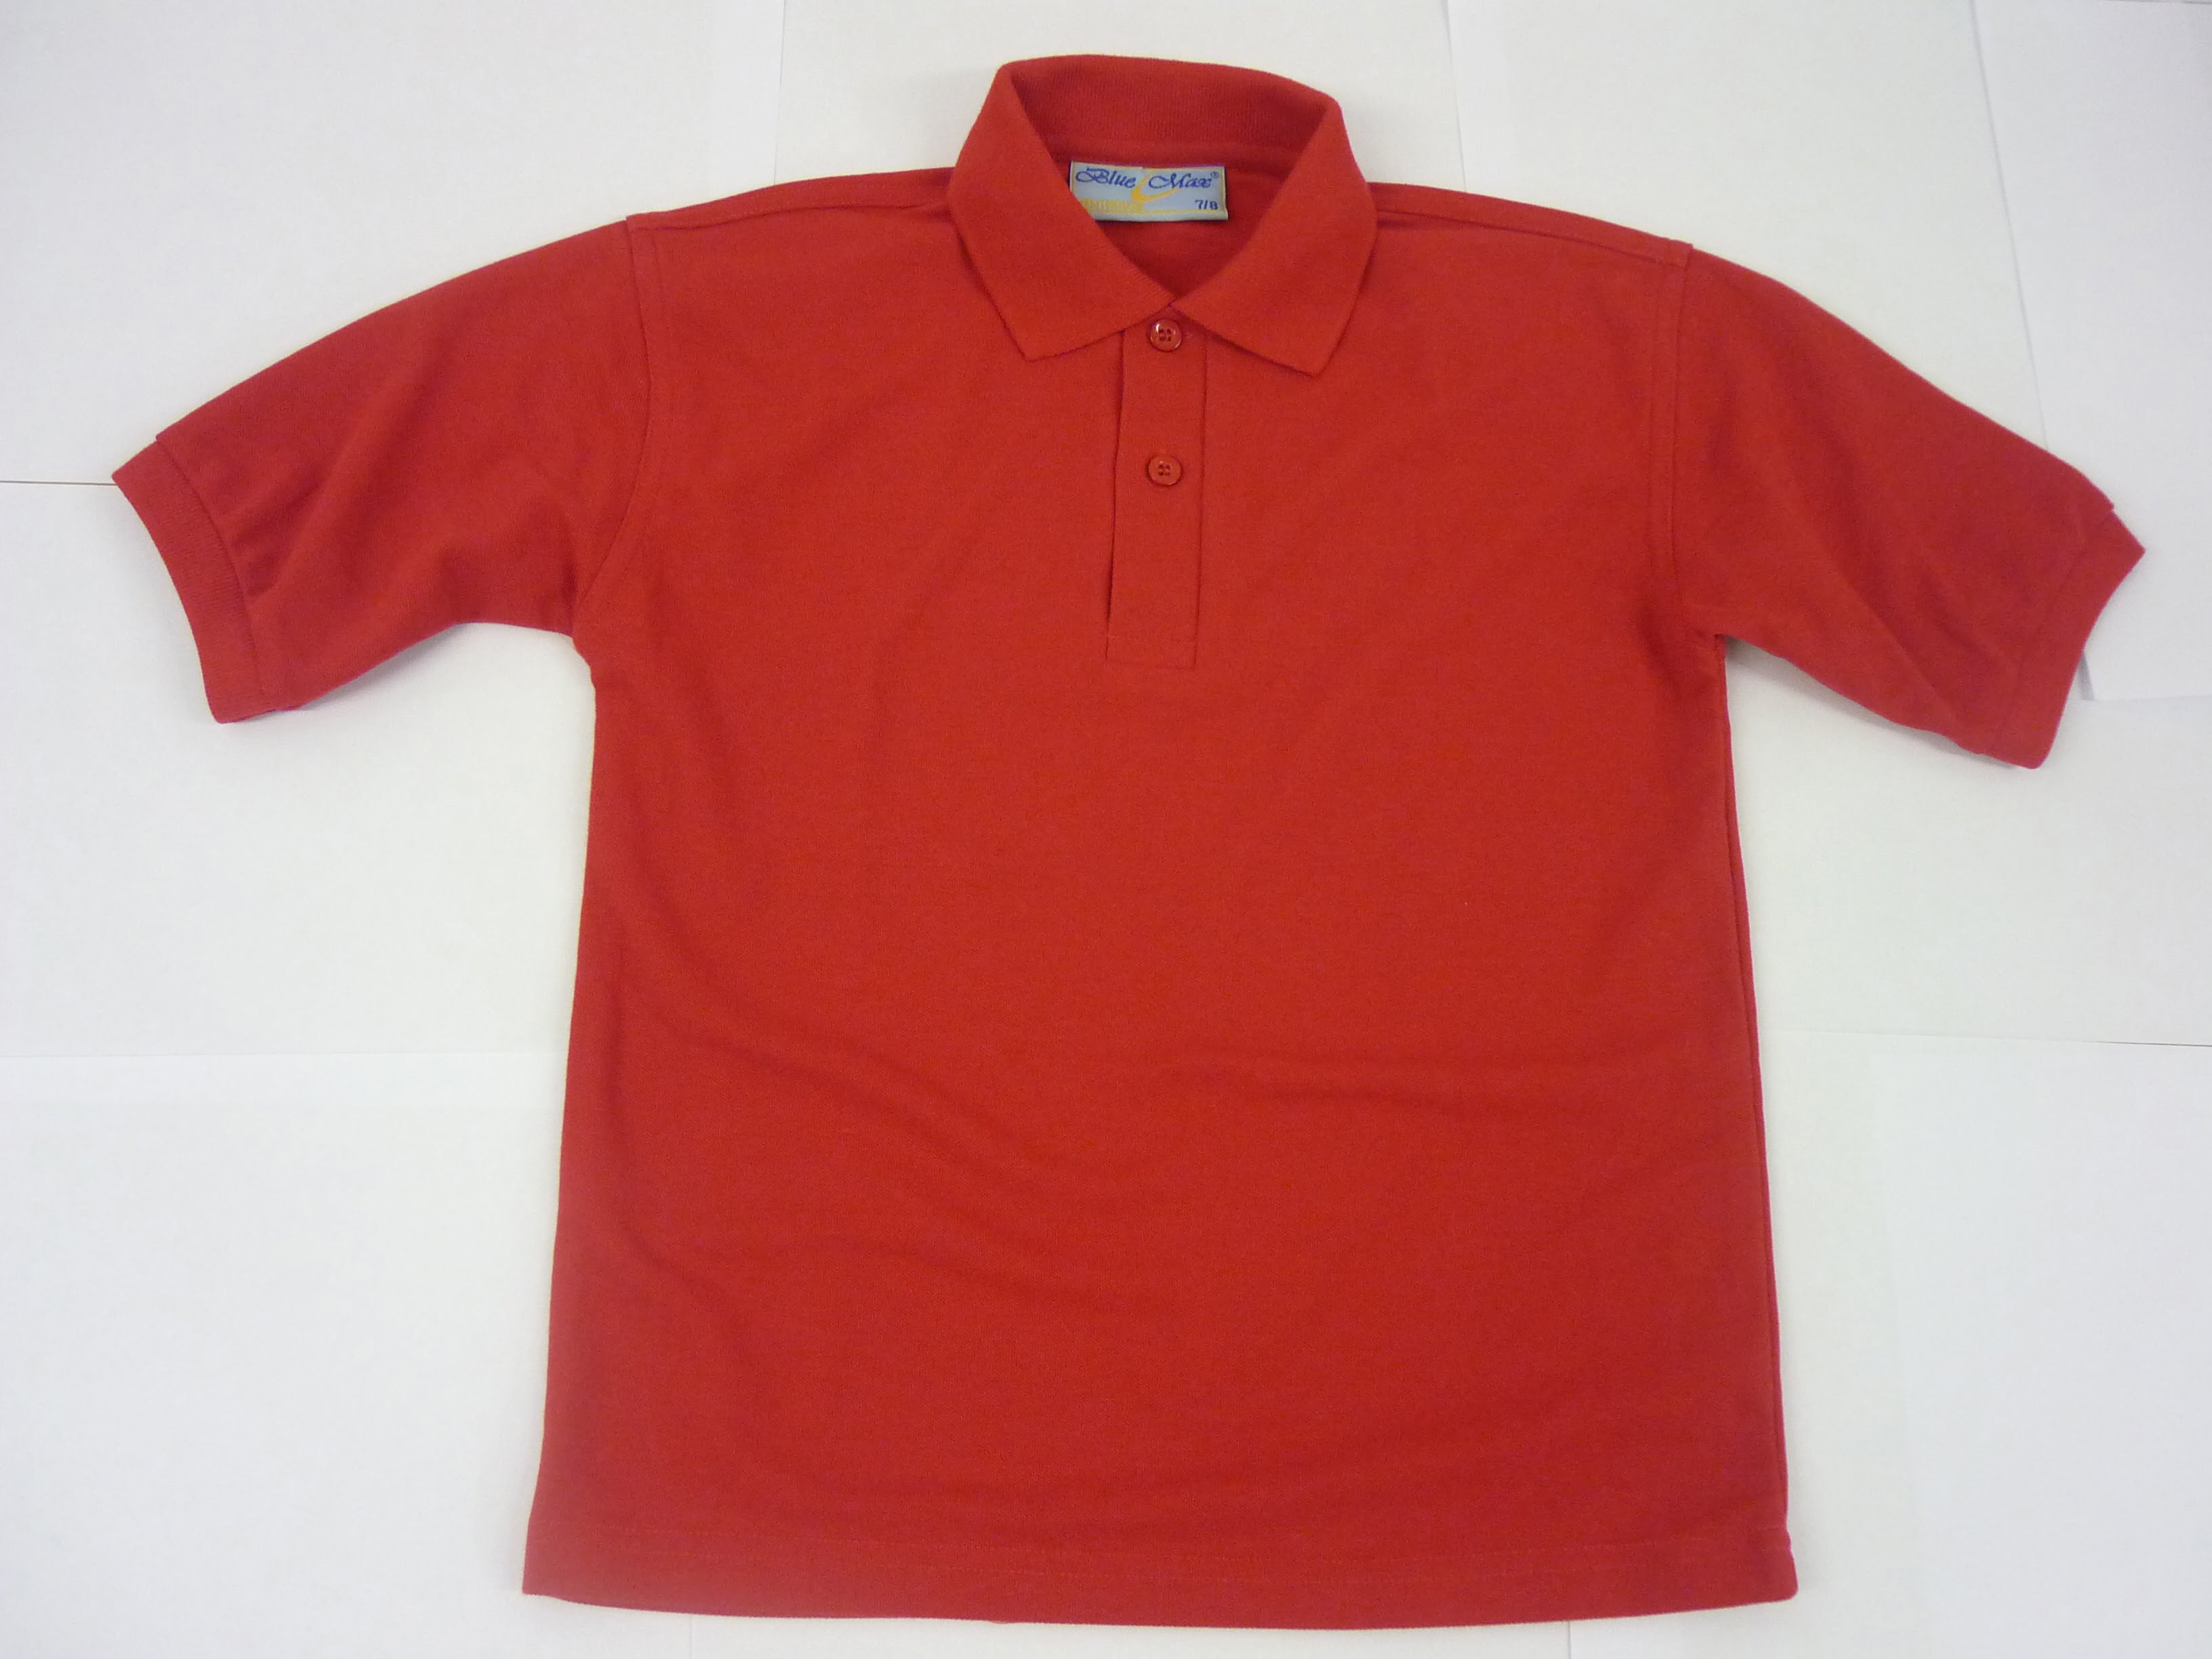 P.E Polo - TSS Sport of Caerphilly. Suppliers of school uniforms in ...